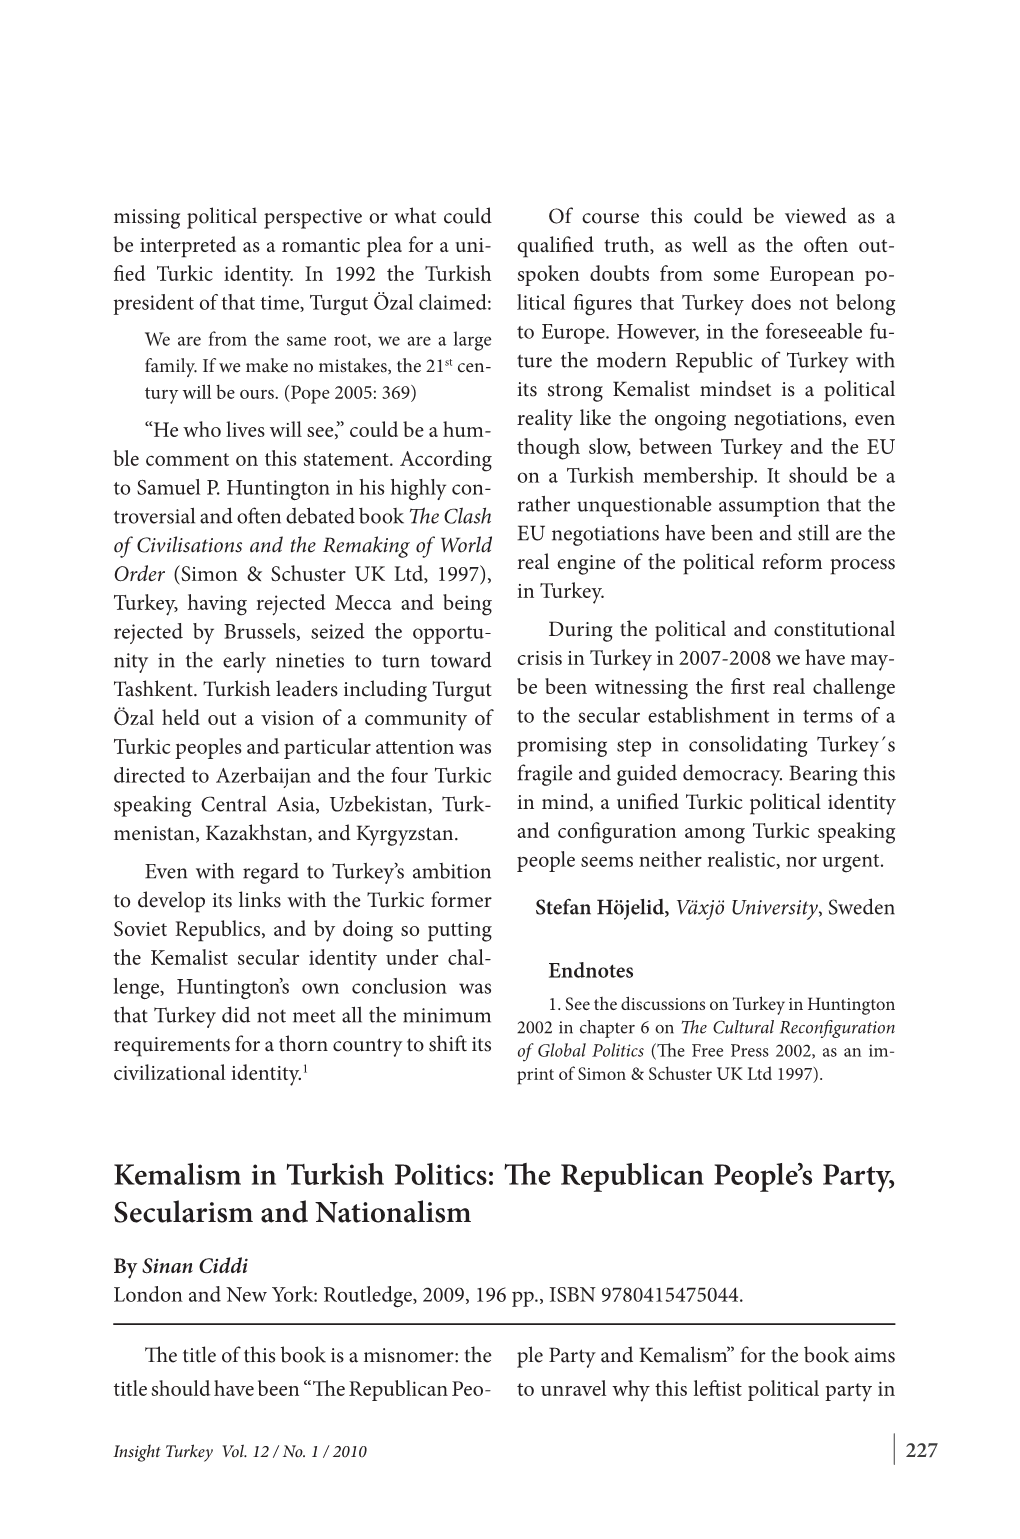 Kemalism in Turkish Politics: the Republican People's Party